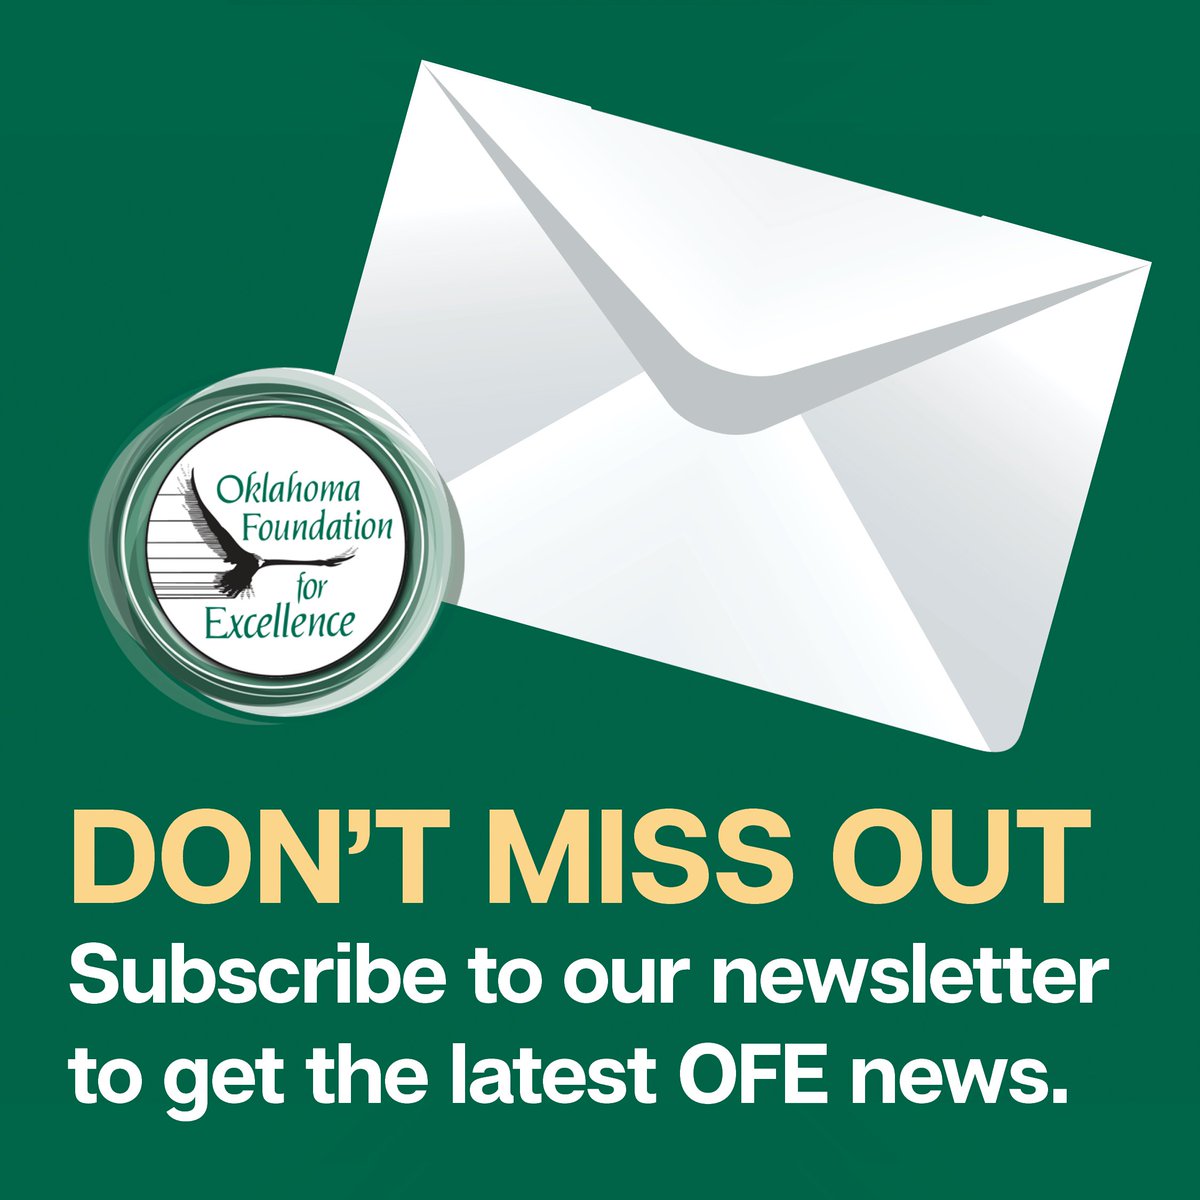 Want to learn more about how the Oklahoma Foundation for Excellence recognizes and encourages academic excellence in Oklahoma’s public schools? Sign up to get the latest news delivered straight to your inbox. To subscribe, visit ow.ly/98vr50QZTIL #oklaed